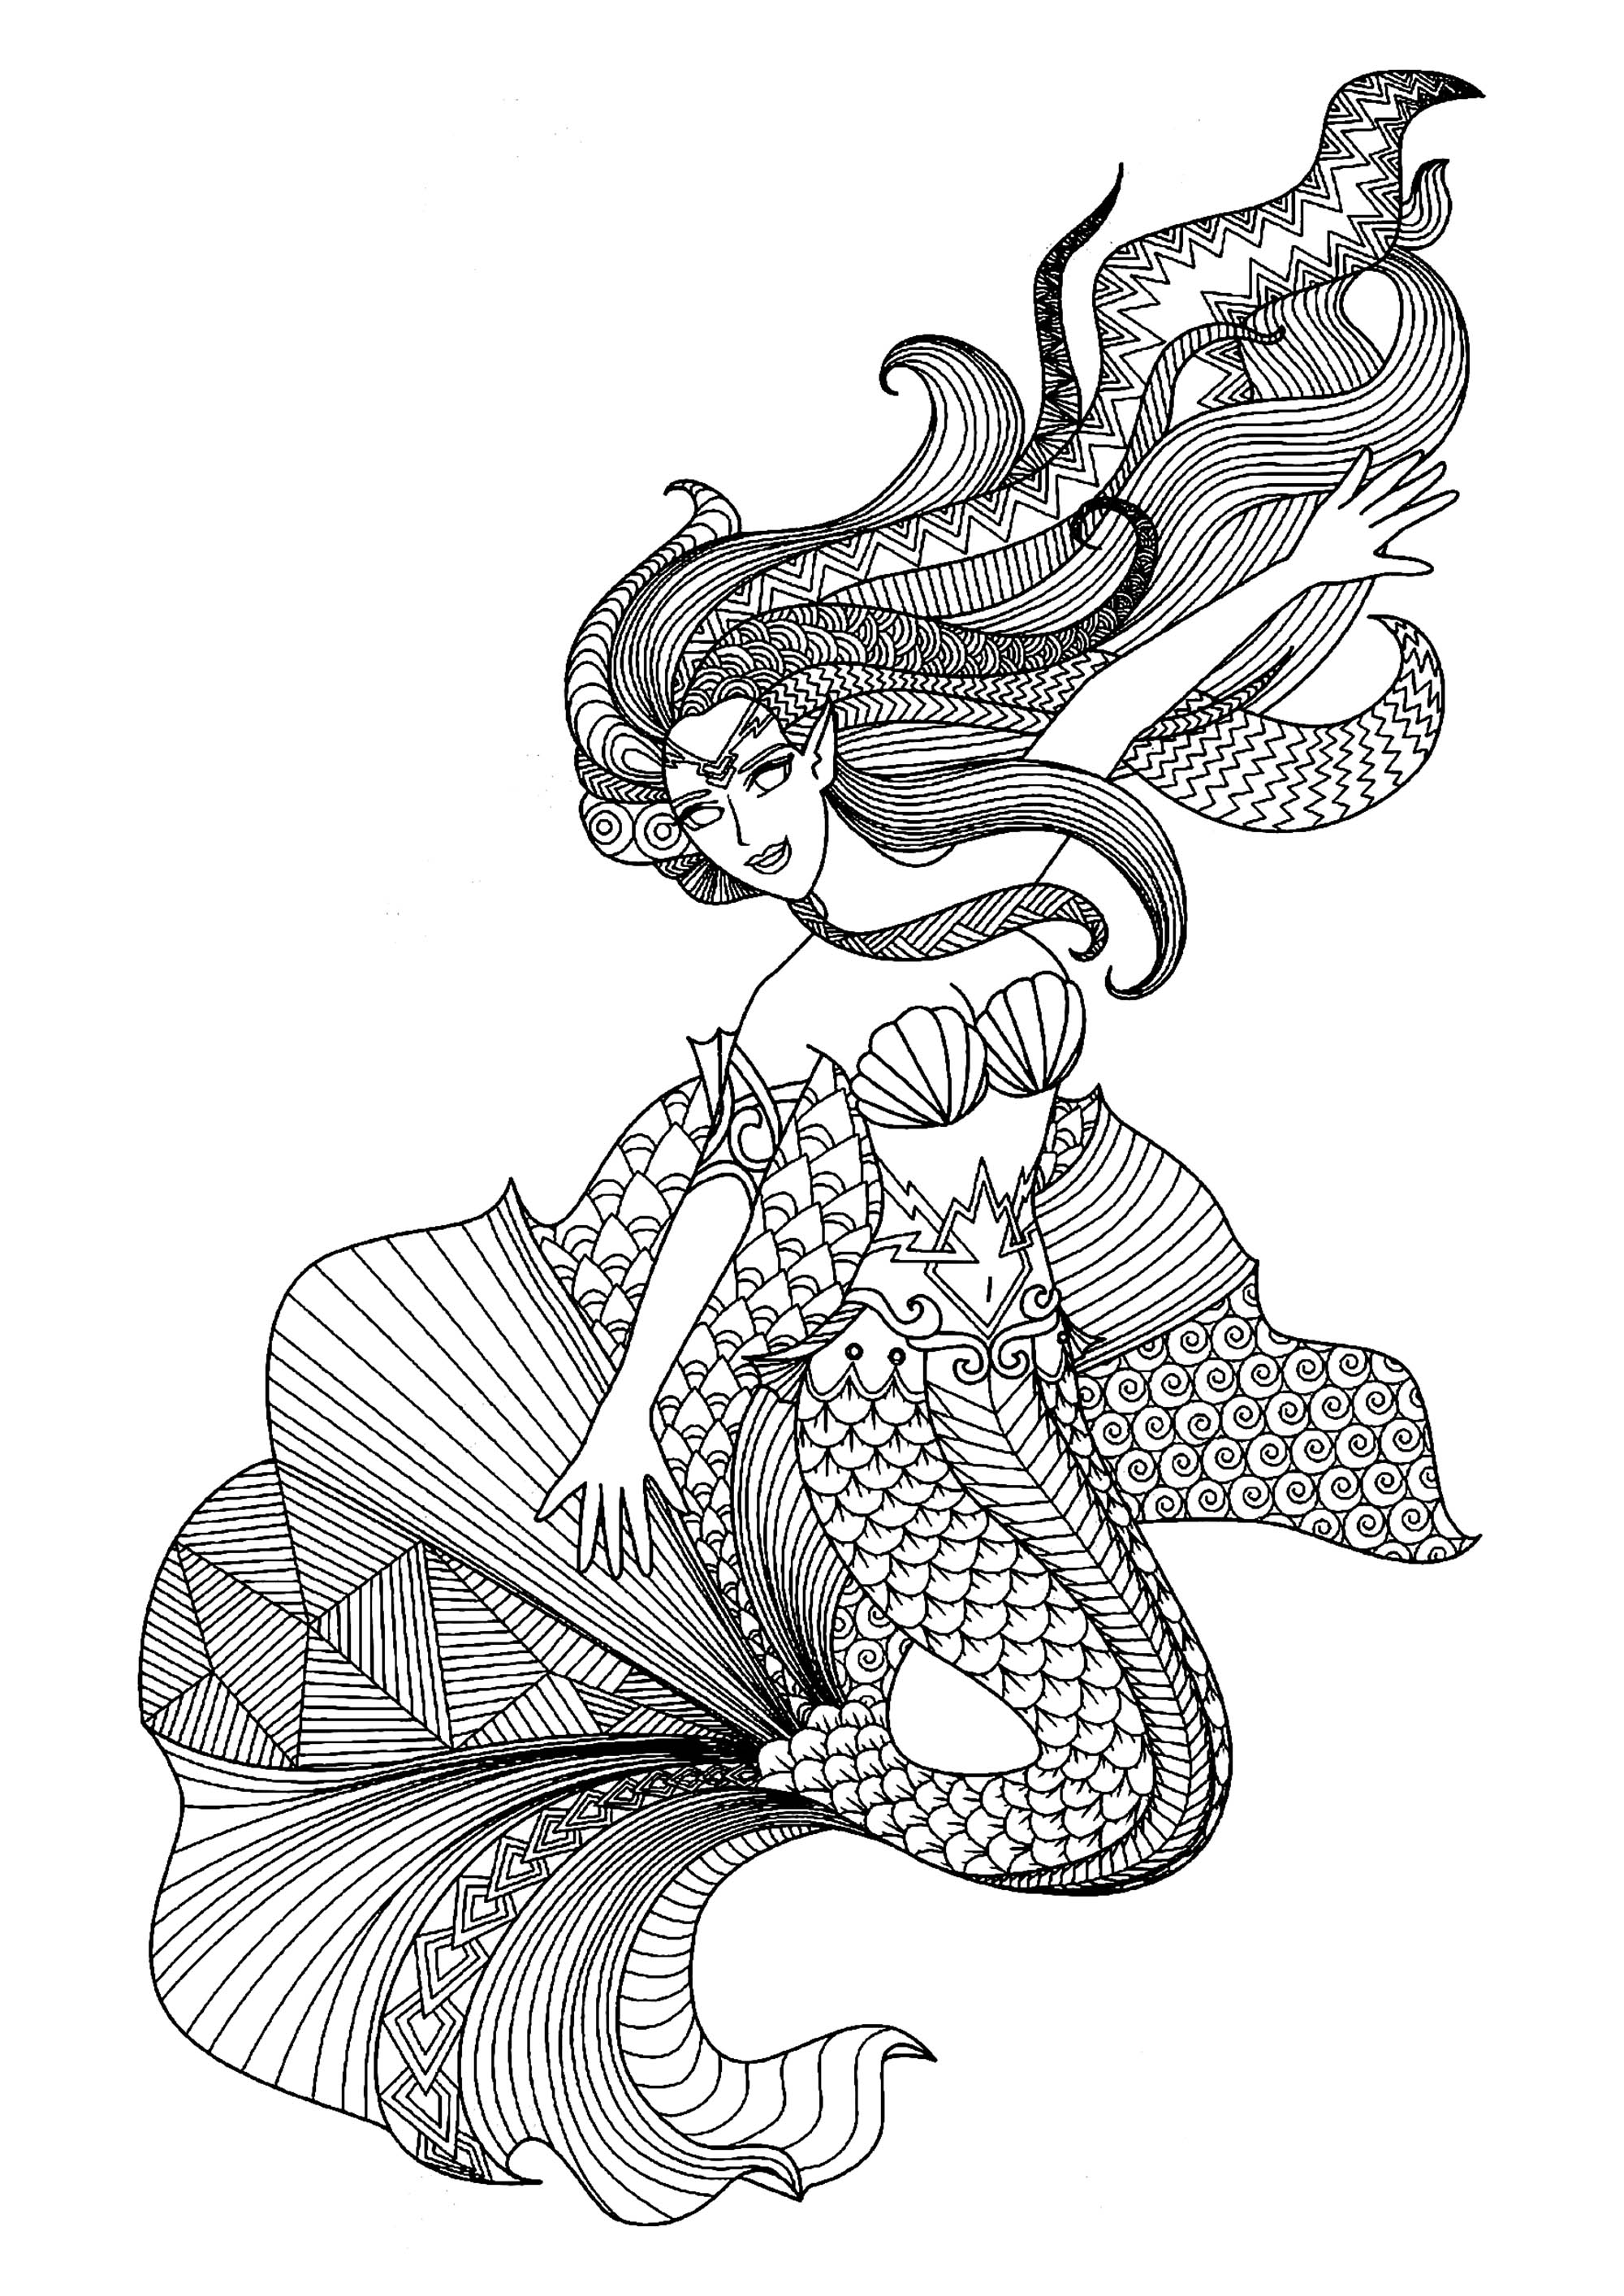 Download - Mermaids Adult Coloring Pages